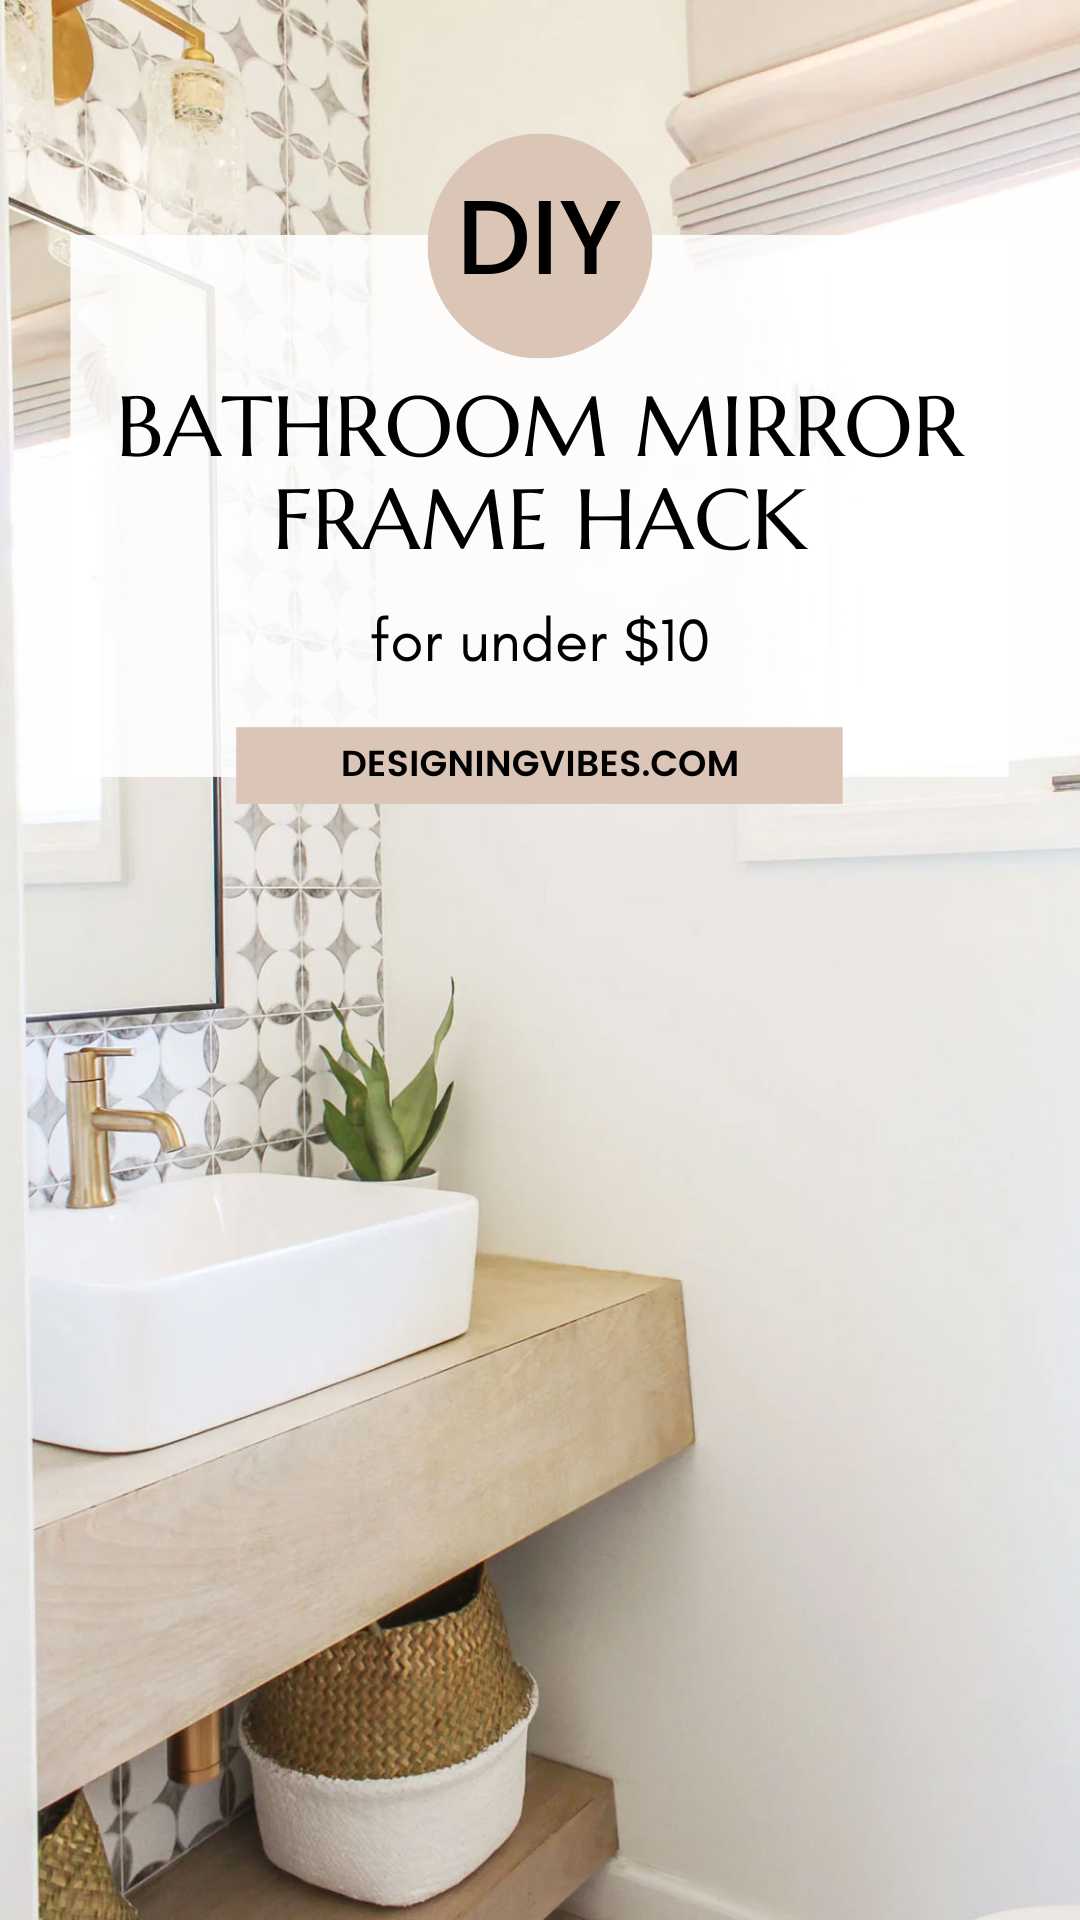 How to Frame a Bathroom Mirror - Budget Friendly DIY Project